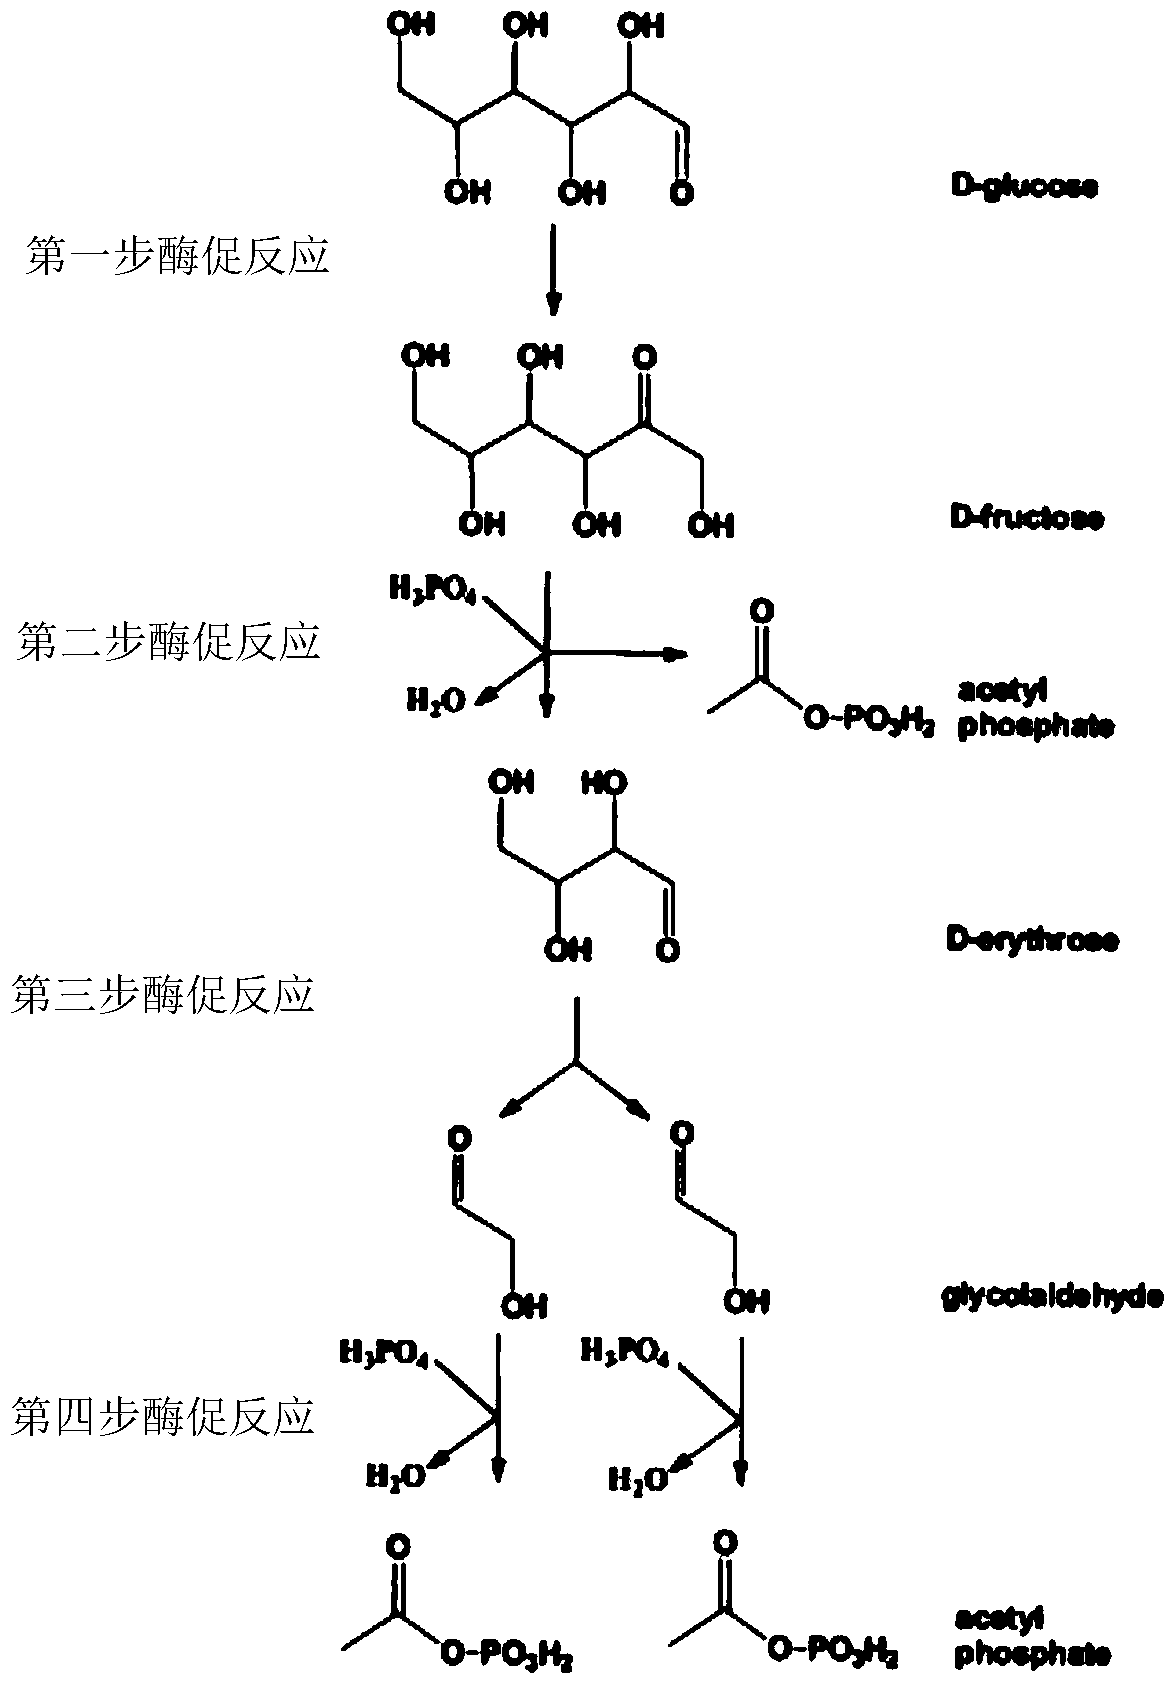 A new pathway for the synthesis of acetyl-CoA and its derivatives from glycolaldehyde